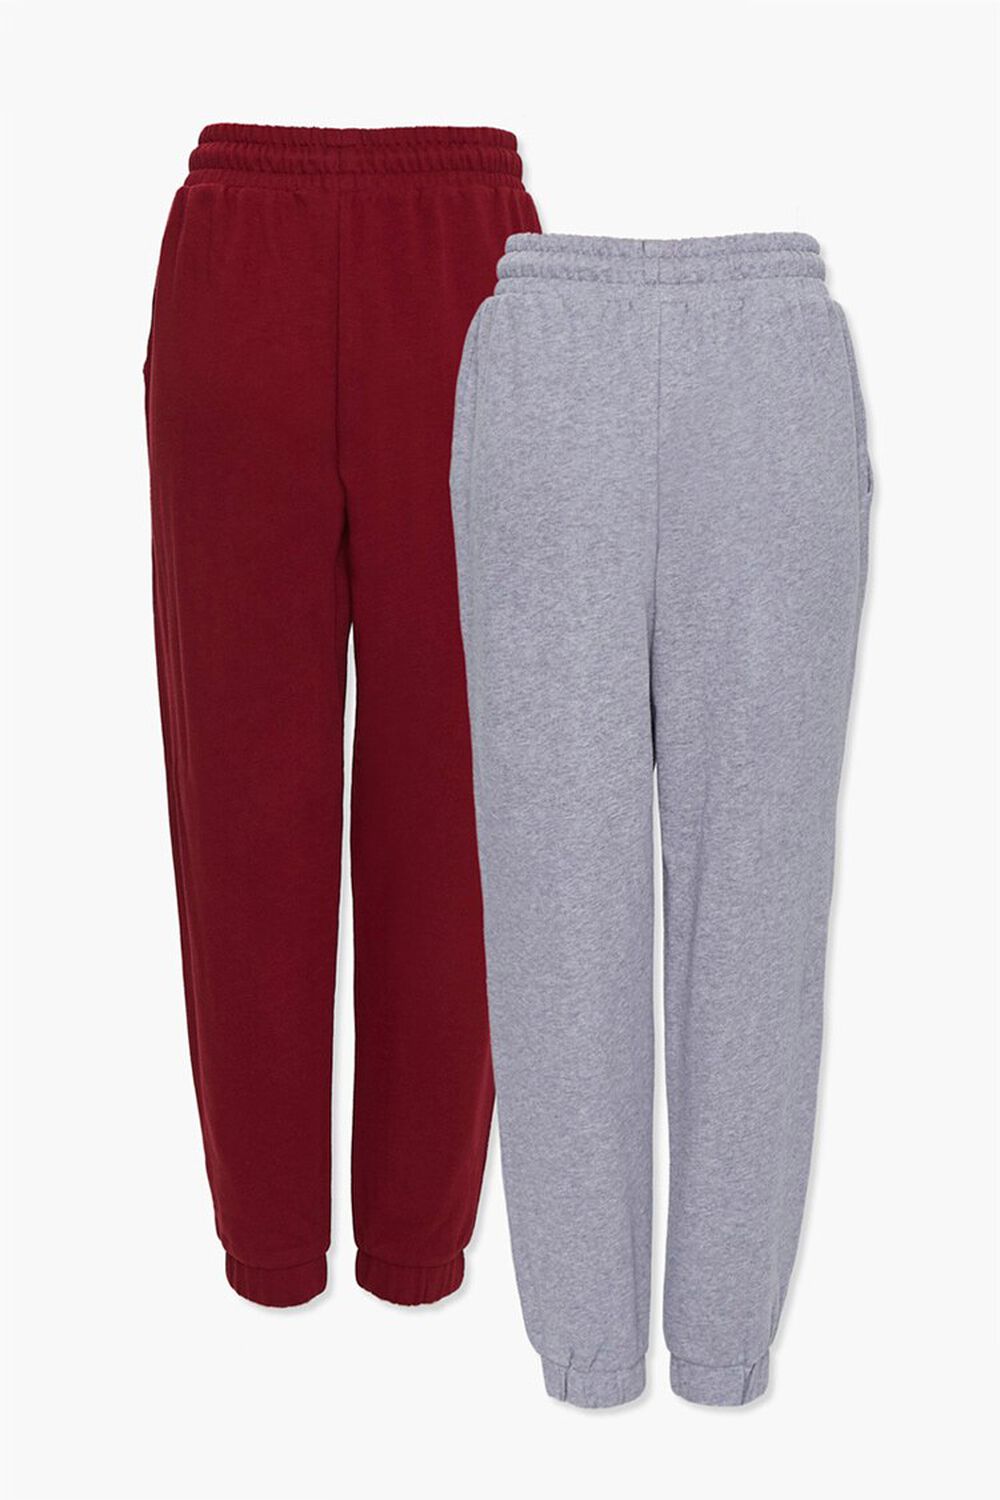 HEATHER GREY/BURGUNDY French Terry Joggers Set, image 2